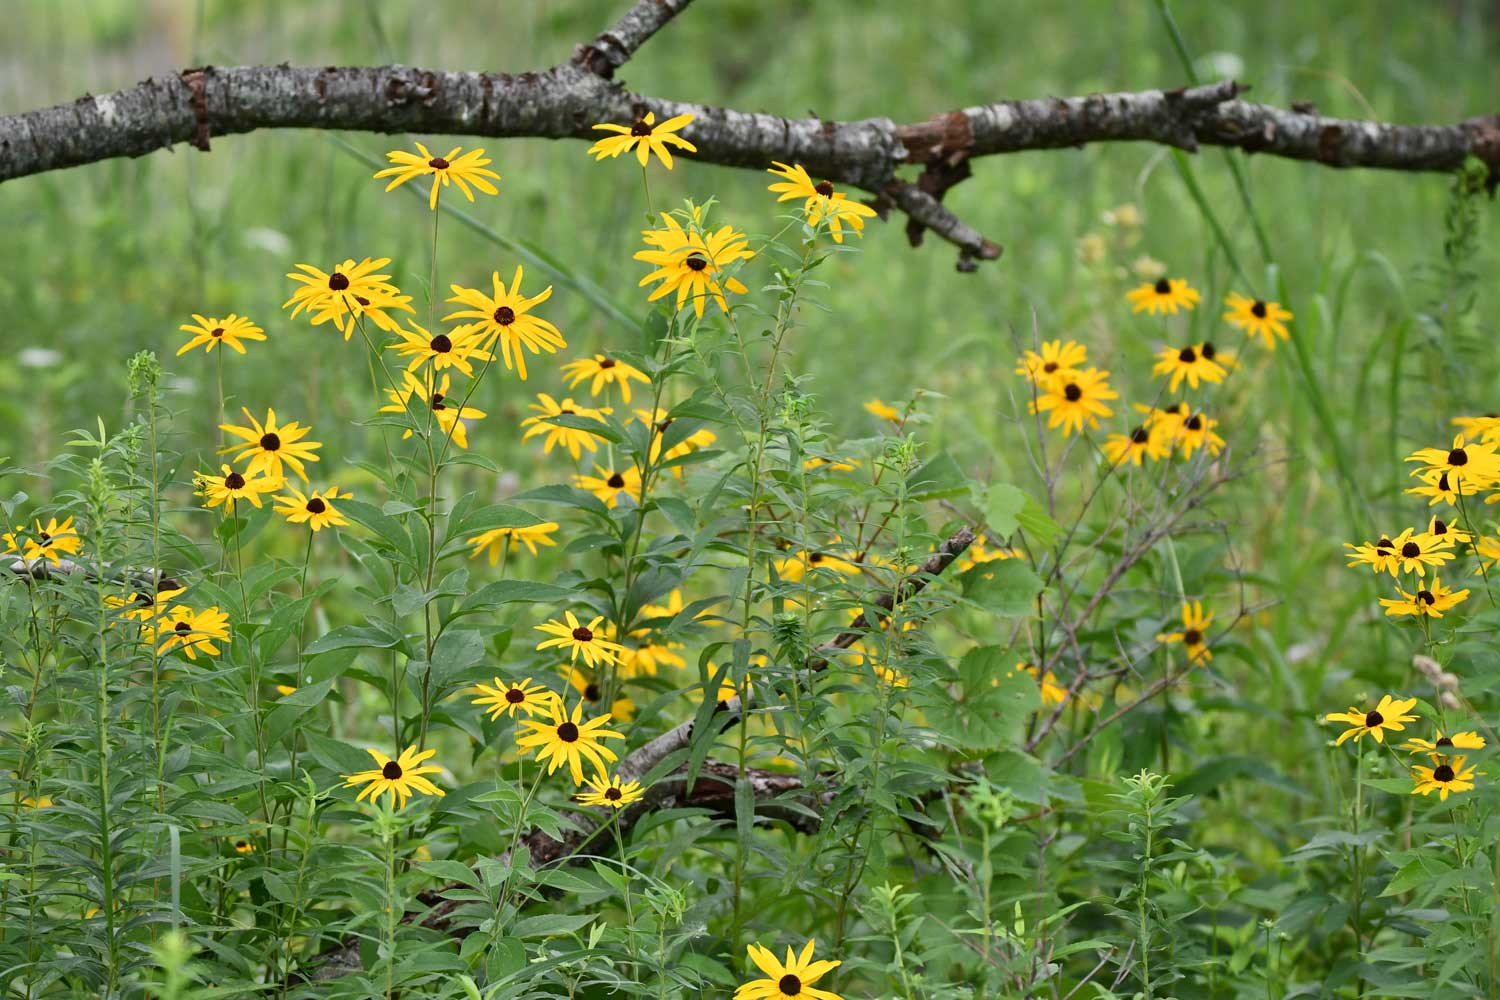 A large group of black-eyed Susans with a few tree branches scattered across the ground.